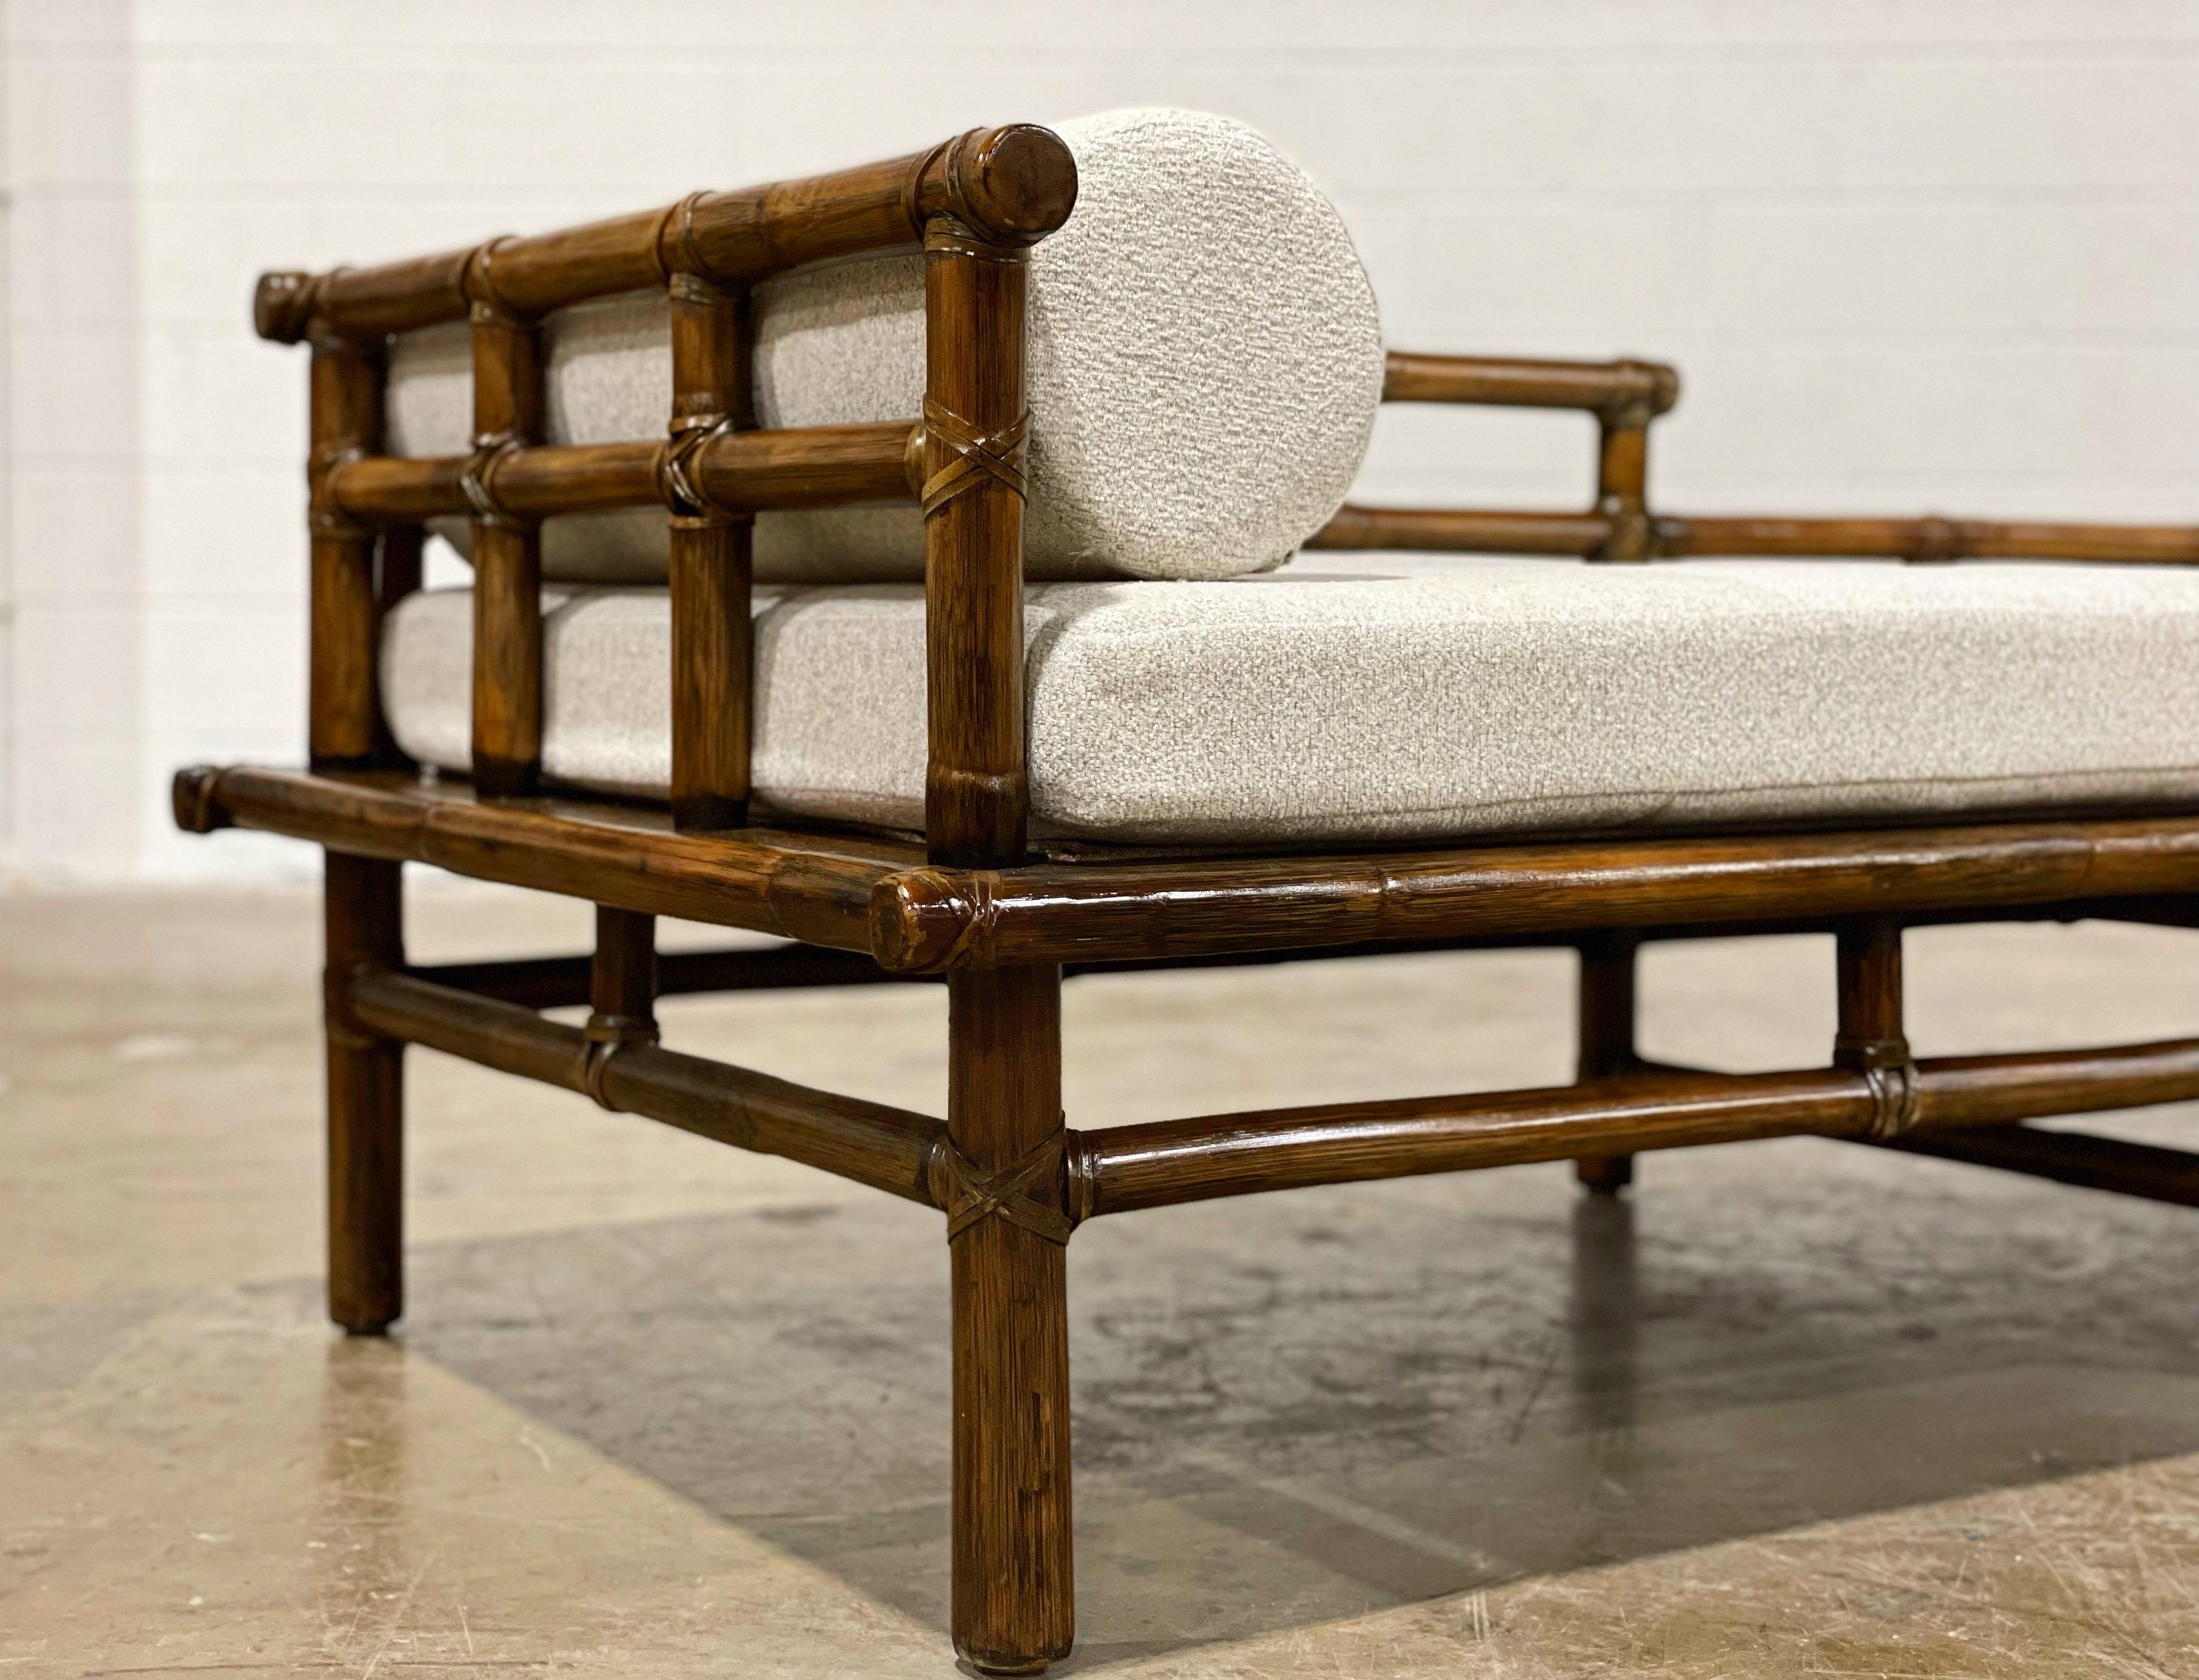 Vintage mid-century bamboo rattan daybed chaise lounge by McGuire, San Francisco circa 1965. Hand-crafted in the California organic modern style - this piece features a sturdy rattan and oak frame with leather rawhide joinery and end caps. The back